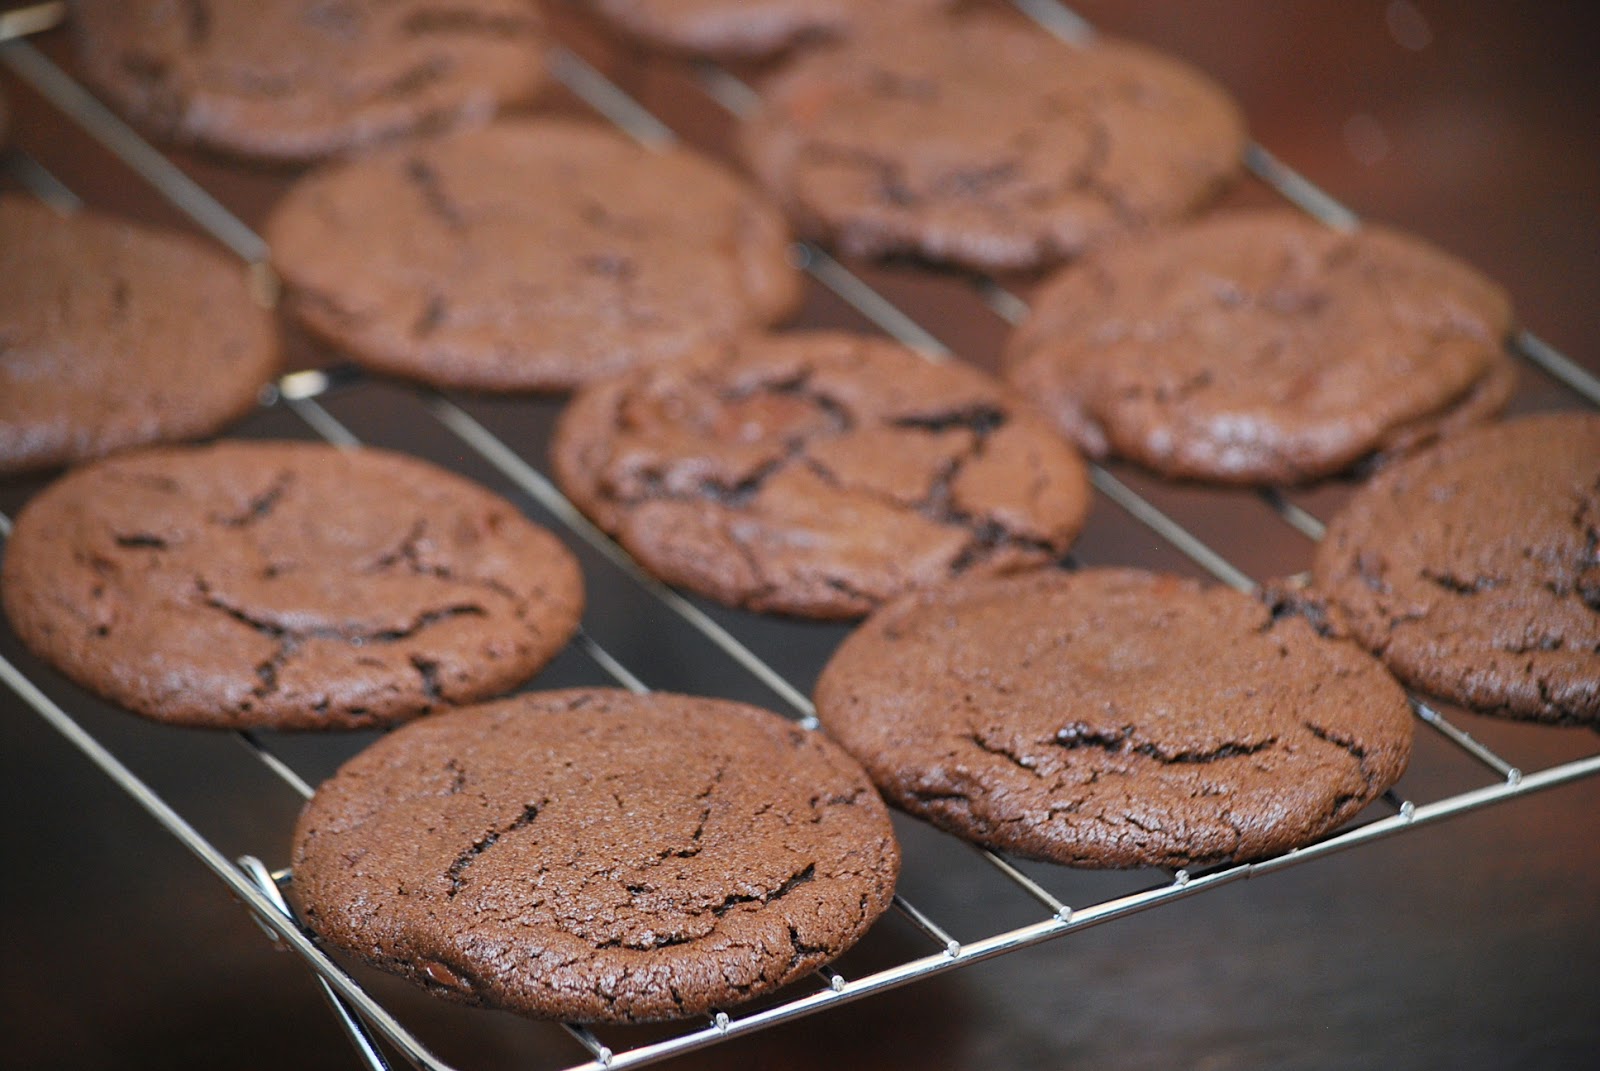 My story in recipes: Chocolate Chocolate Chip Cookies